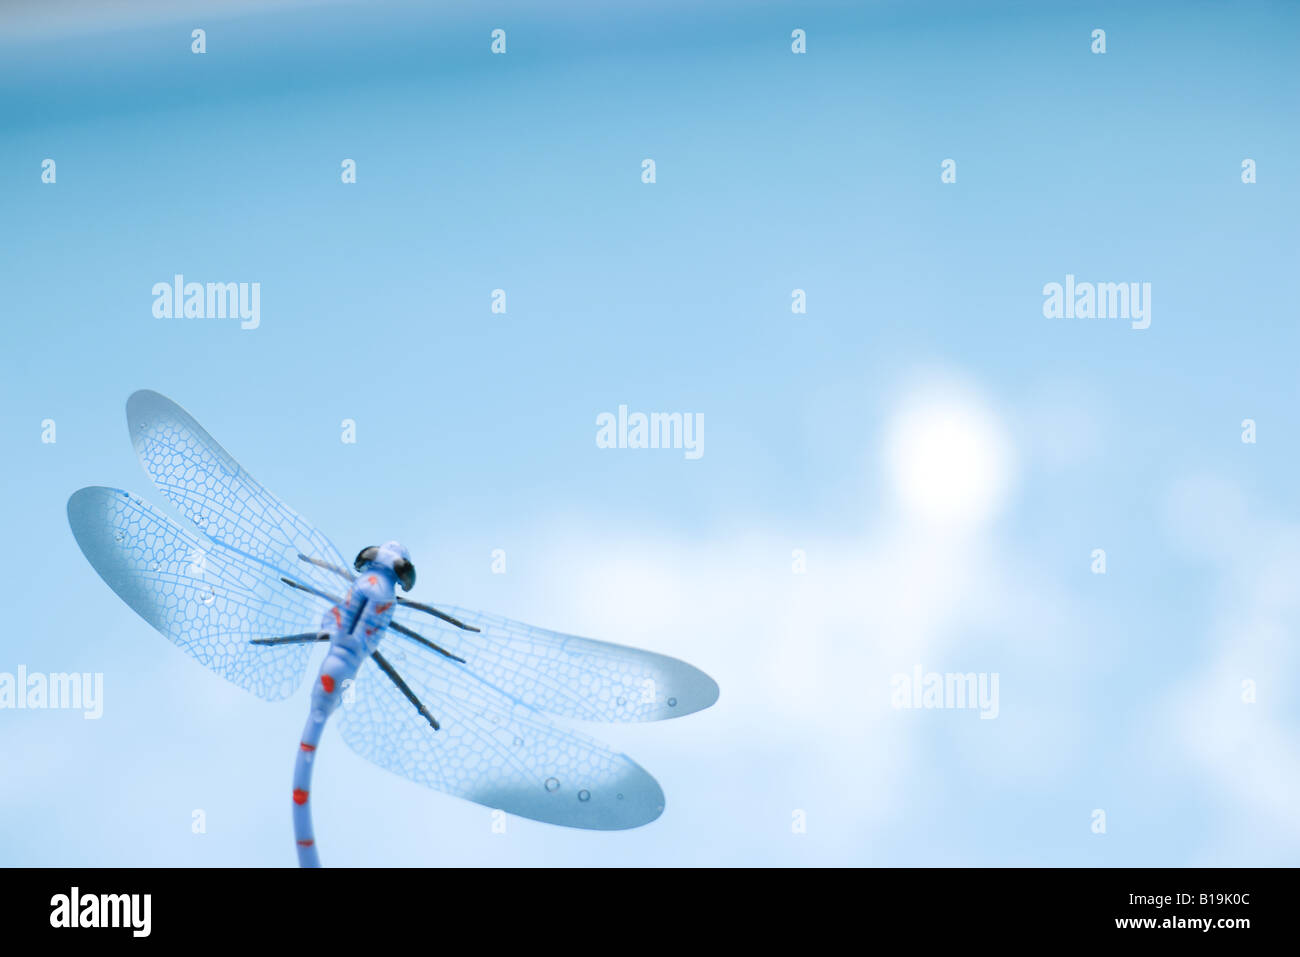 Dragonfly, close-up Foto Stock